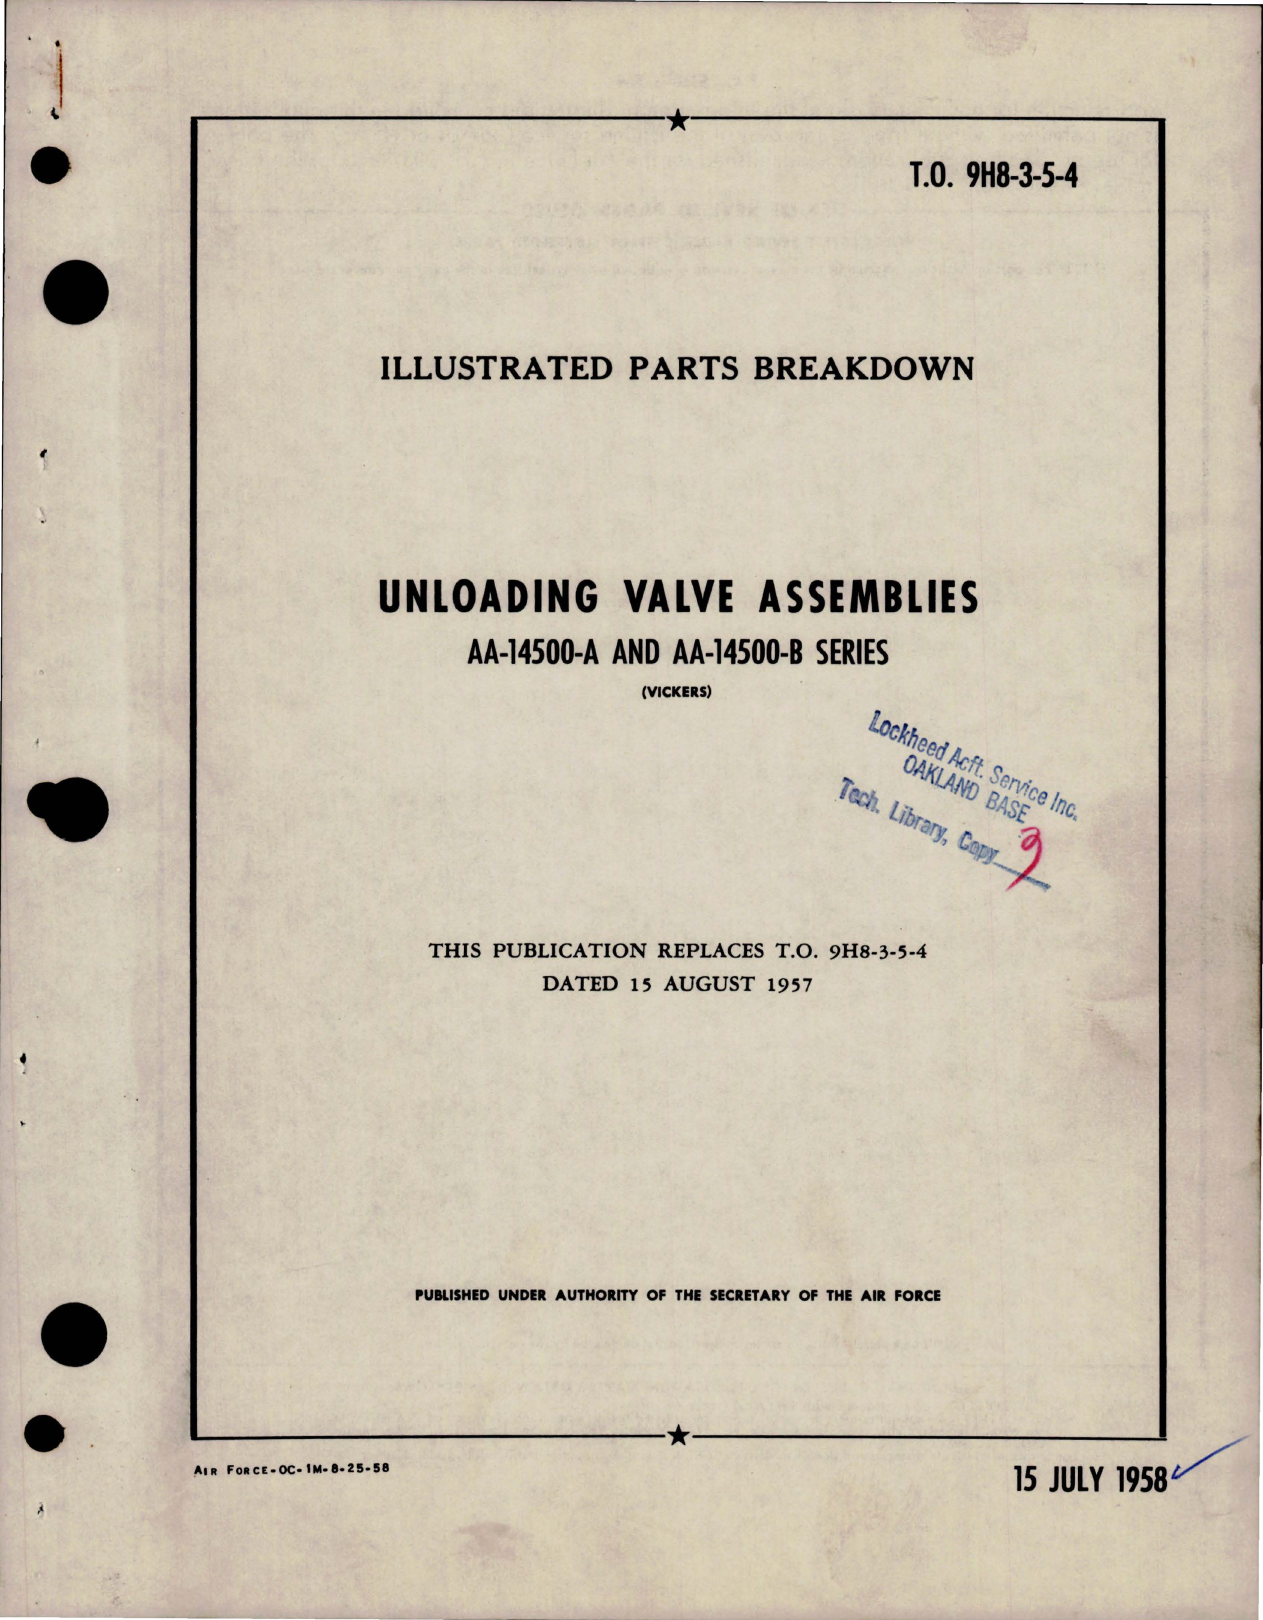 Sample page 1 from AirCorps Library document: Illustrates Parts Breakdown for Unloading Valve Assemblies - AA-14500-A and AA-14500-B Series 